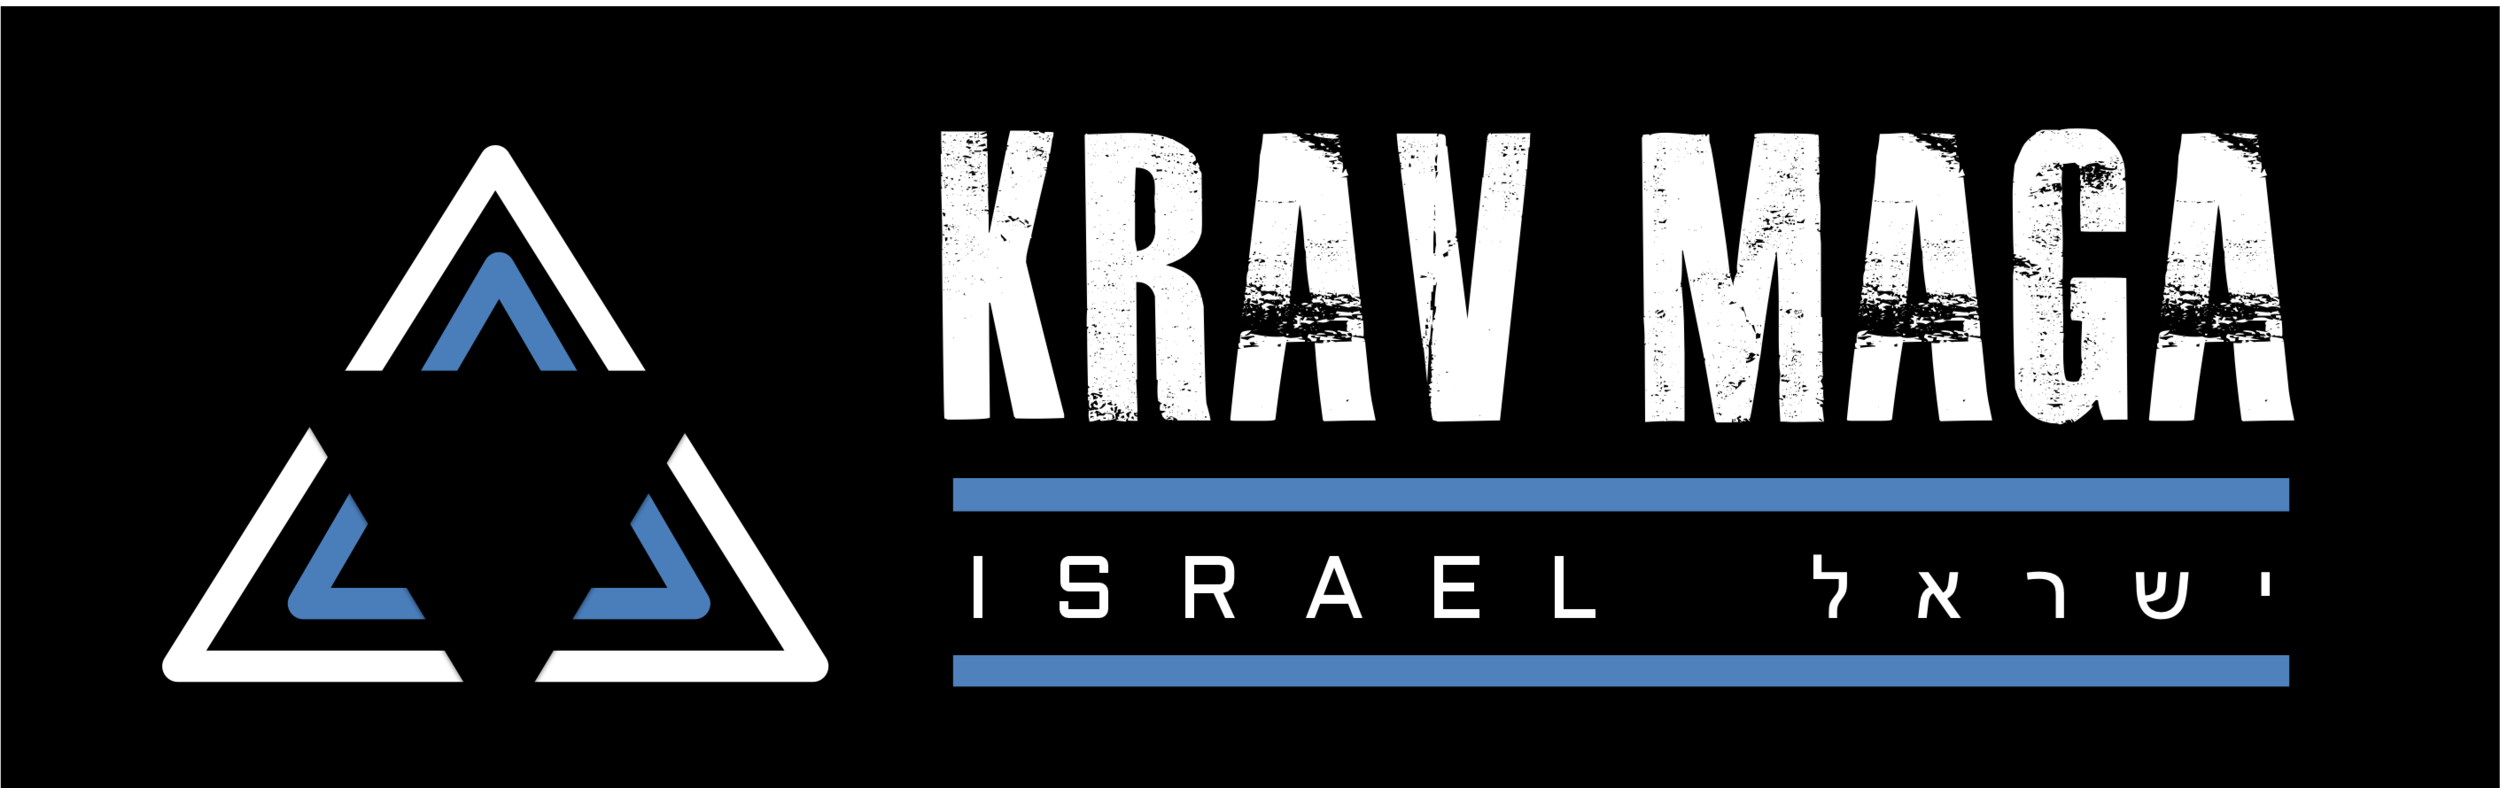 Train Krav Maga in Israel - Camps, Private Lessons, Certification Courses, Advanced Instructor Training